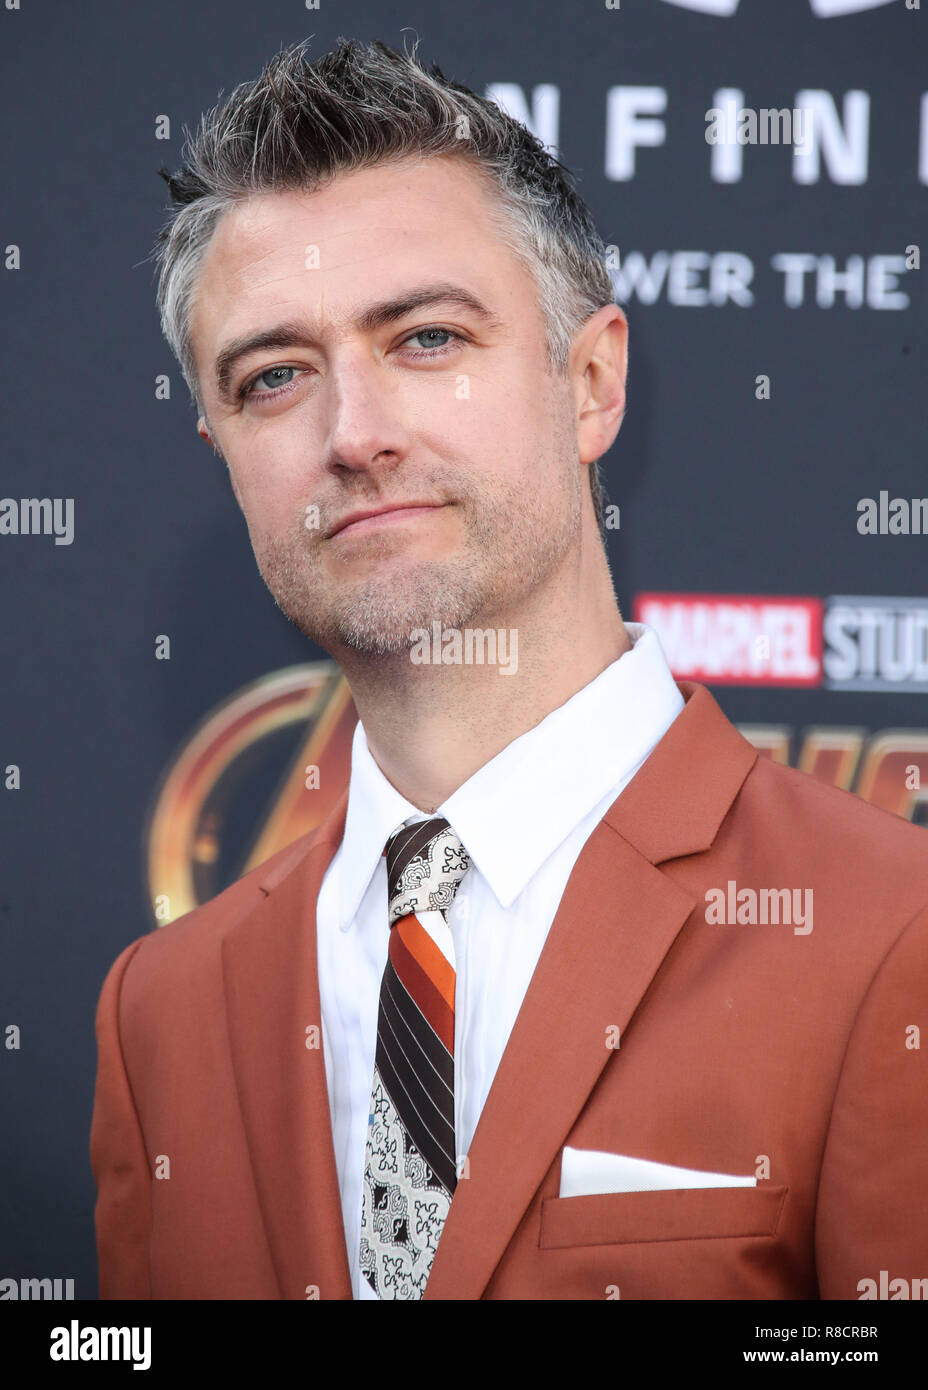 HOLLYWOOD, LOS ANGELES, CA, USA - APRIL 23: Sean Gunn at the World Premiere Of Disney And Marvel's 'Avengers: Infinity War' held at the El Capitan Theatre, Dolby Theatre and TCL Chinese Theatre IMAX on April 23, 2018 in Hollywood, Los Angeles, California, United States. (Photo by Xavier Collin/Image Press Agency) Stock Photo